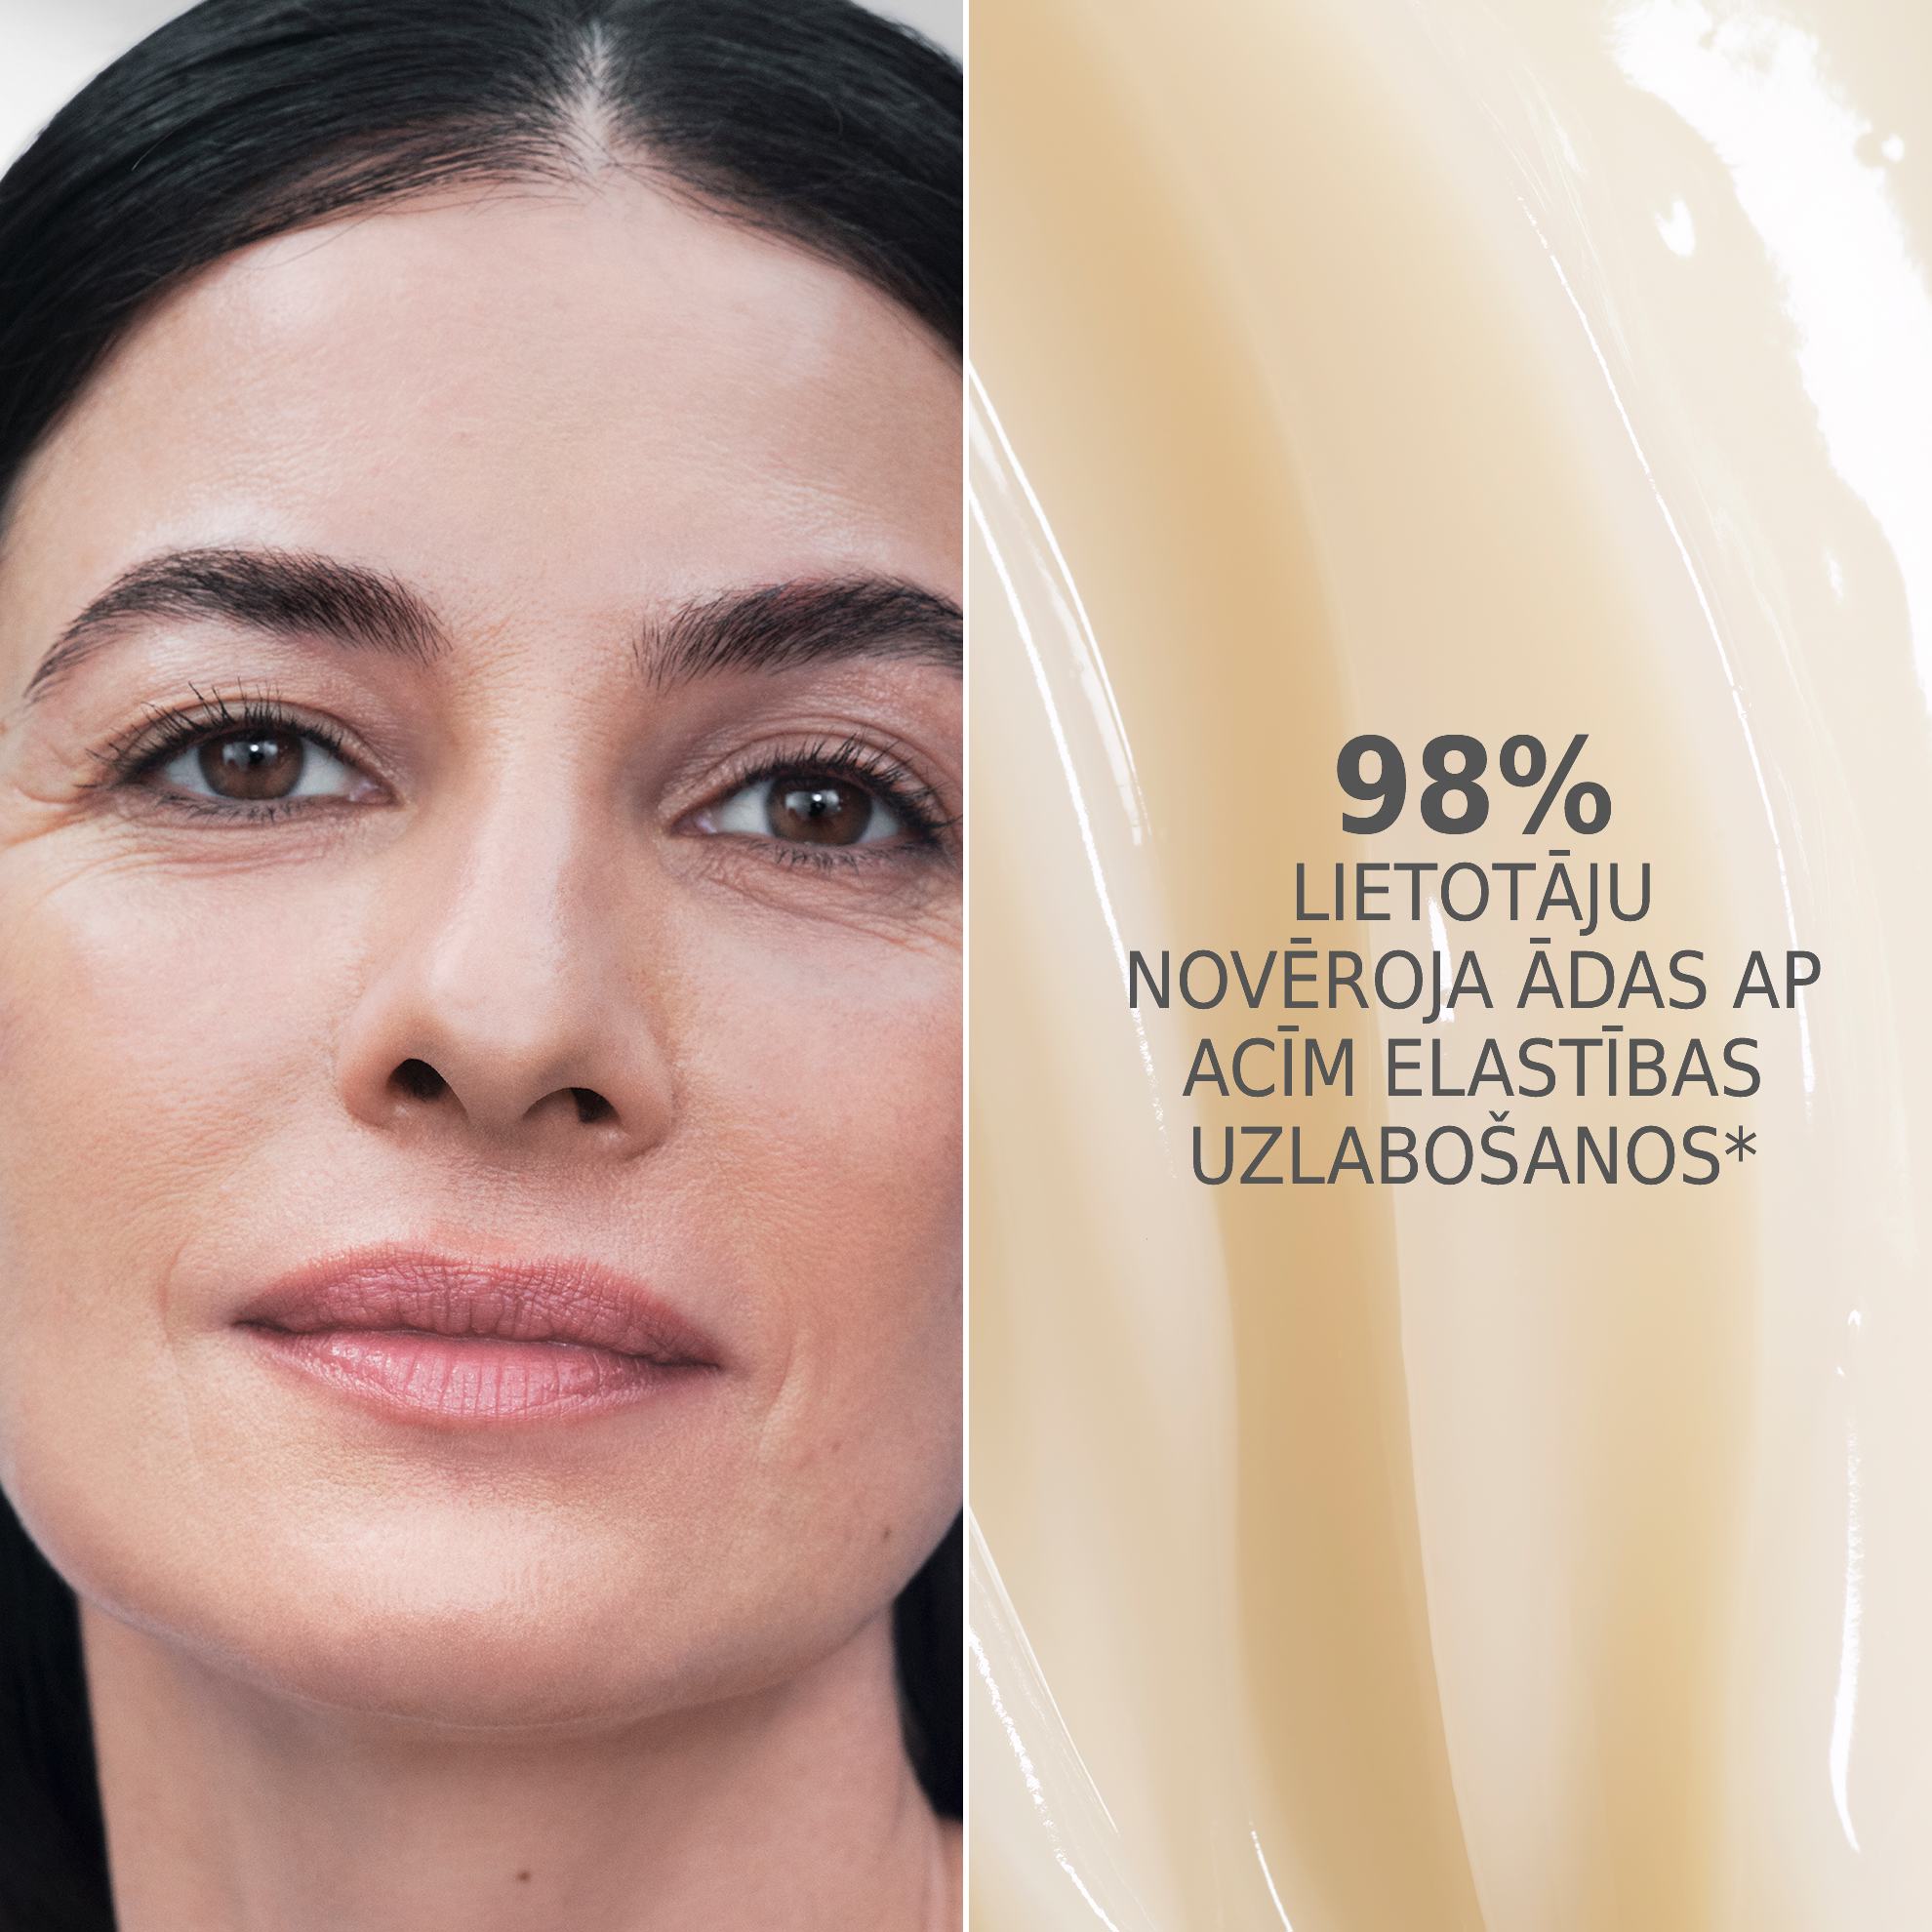 https://media-cdn.oriflame.com/productImage?externalMediaId=product-management-media%2fProducts%2f42425%2fLV%2f42425_2.png&id=17605635&version=2